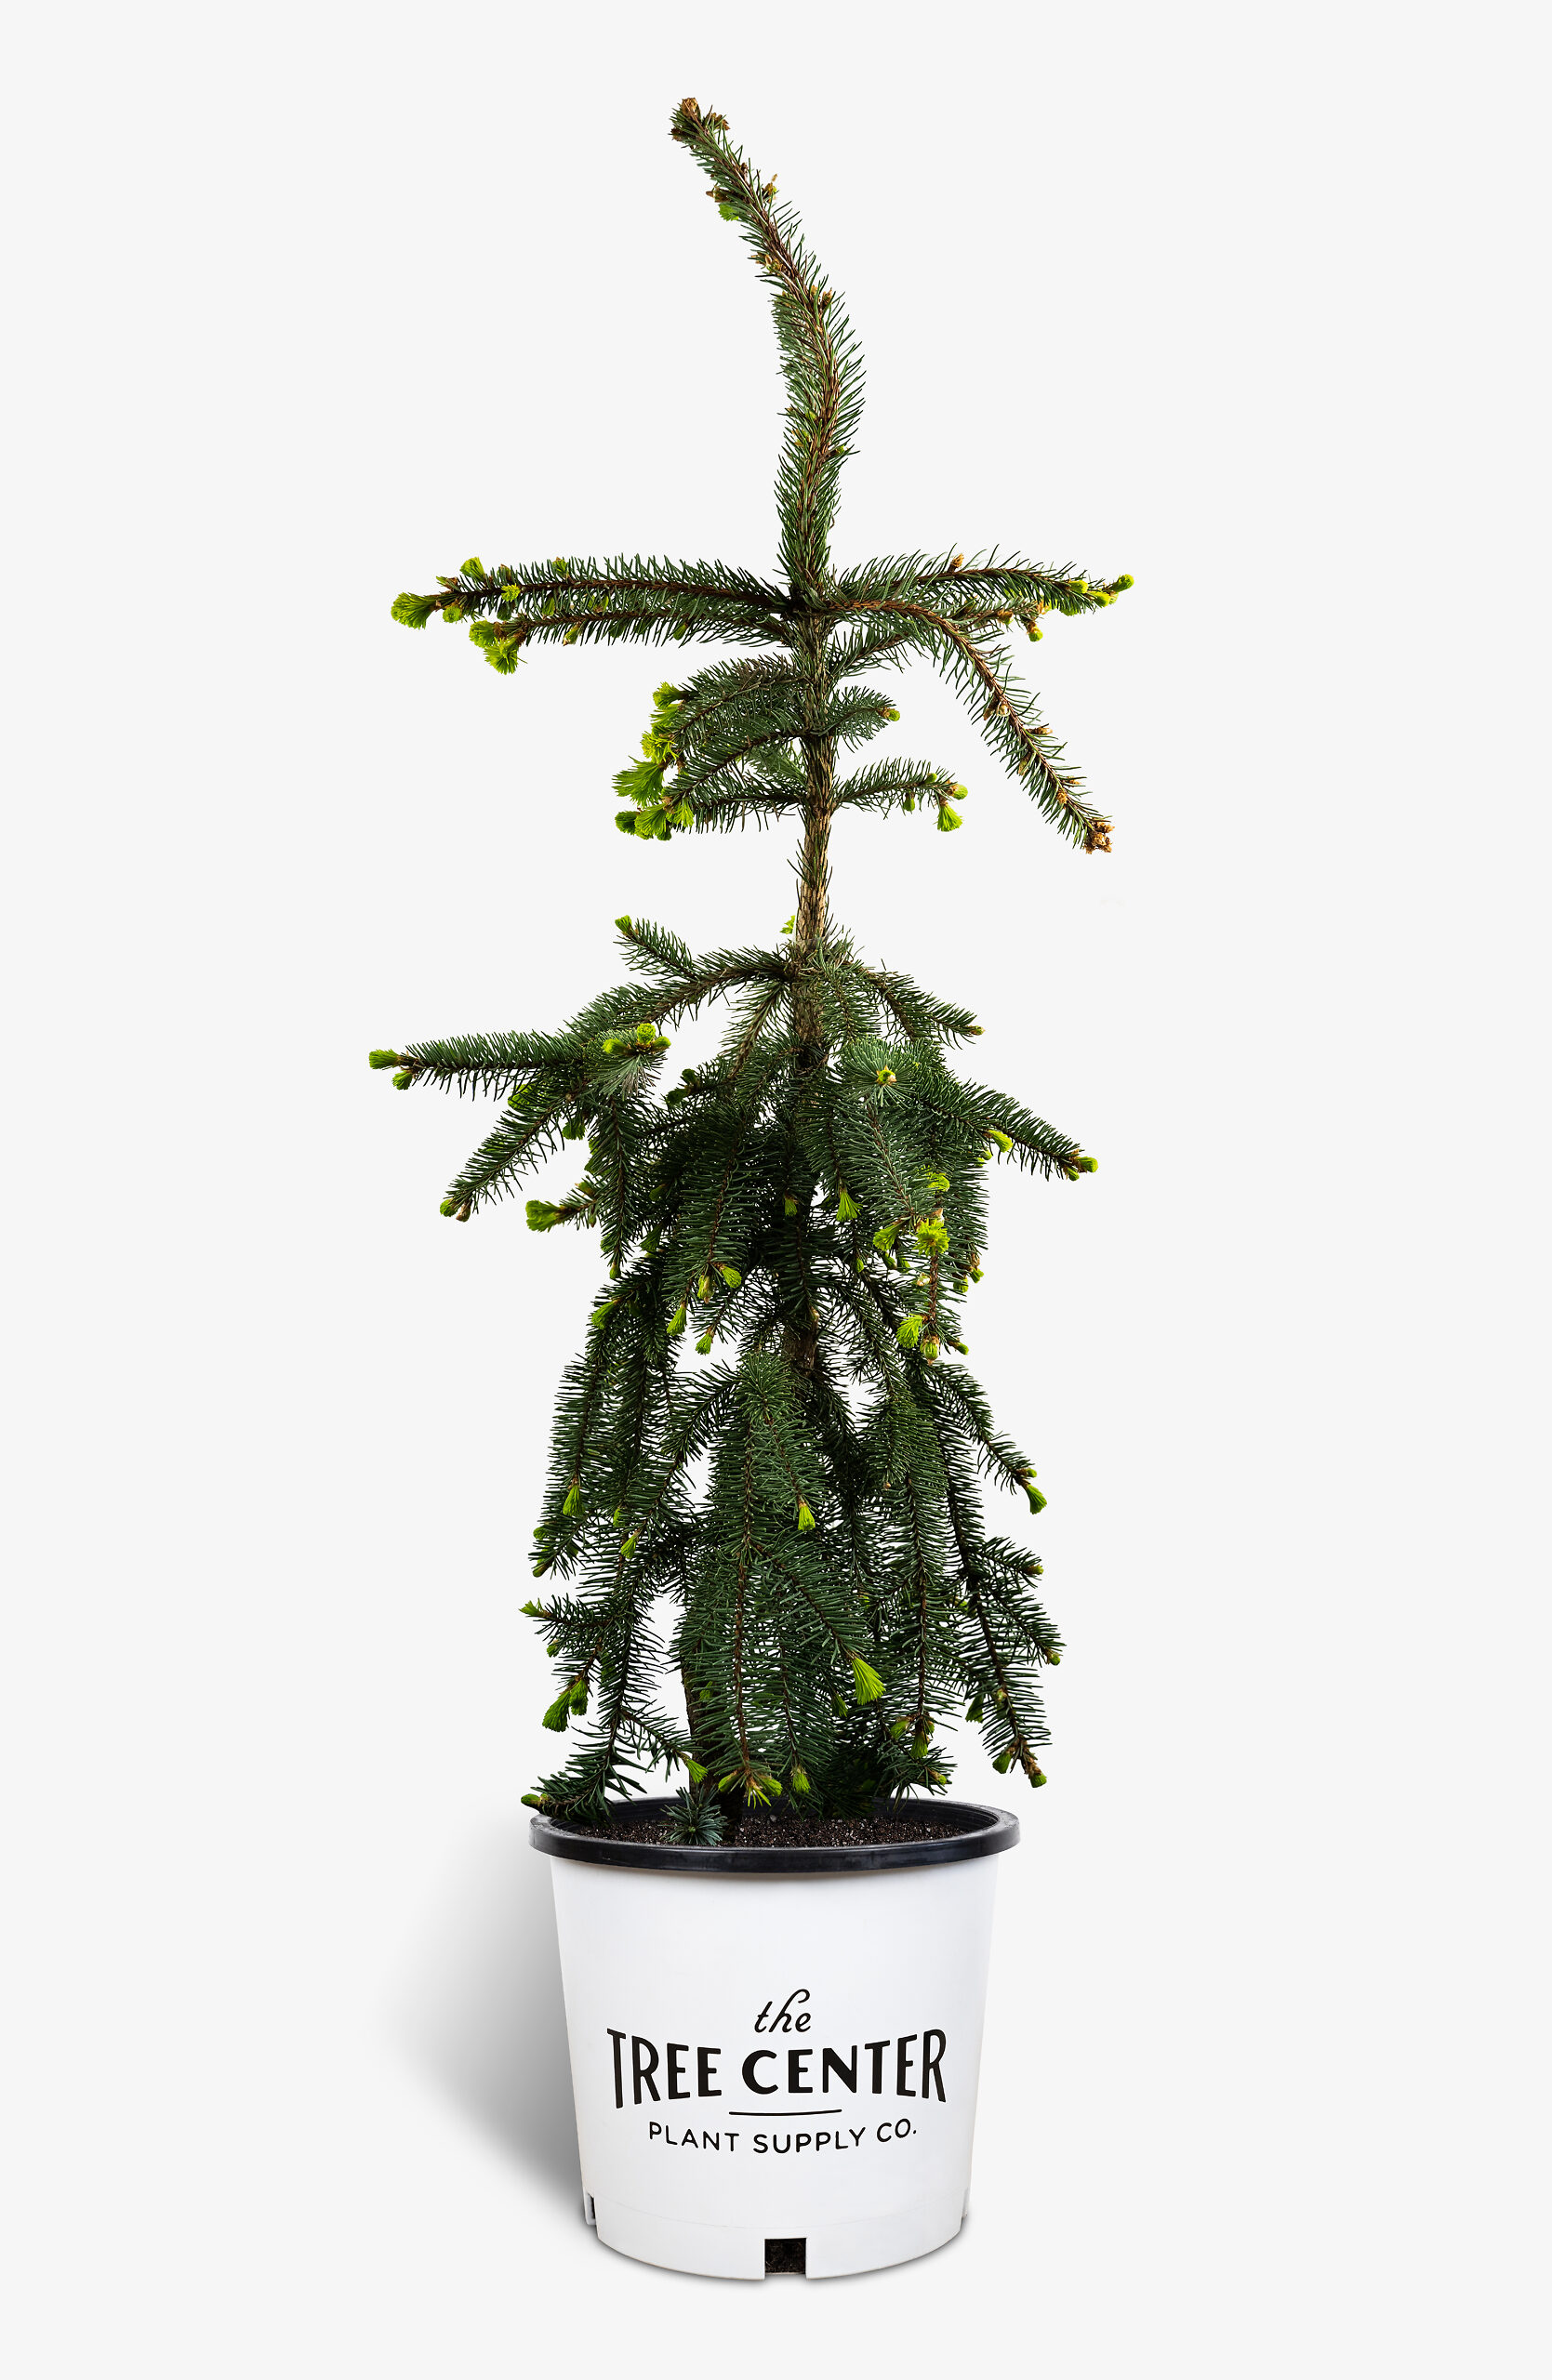 Weeping Norway Spruce For Sale Online The Tree Center